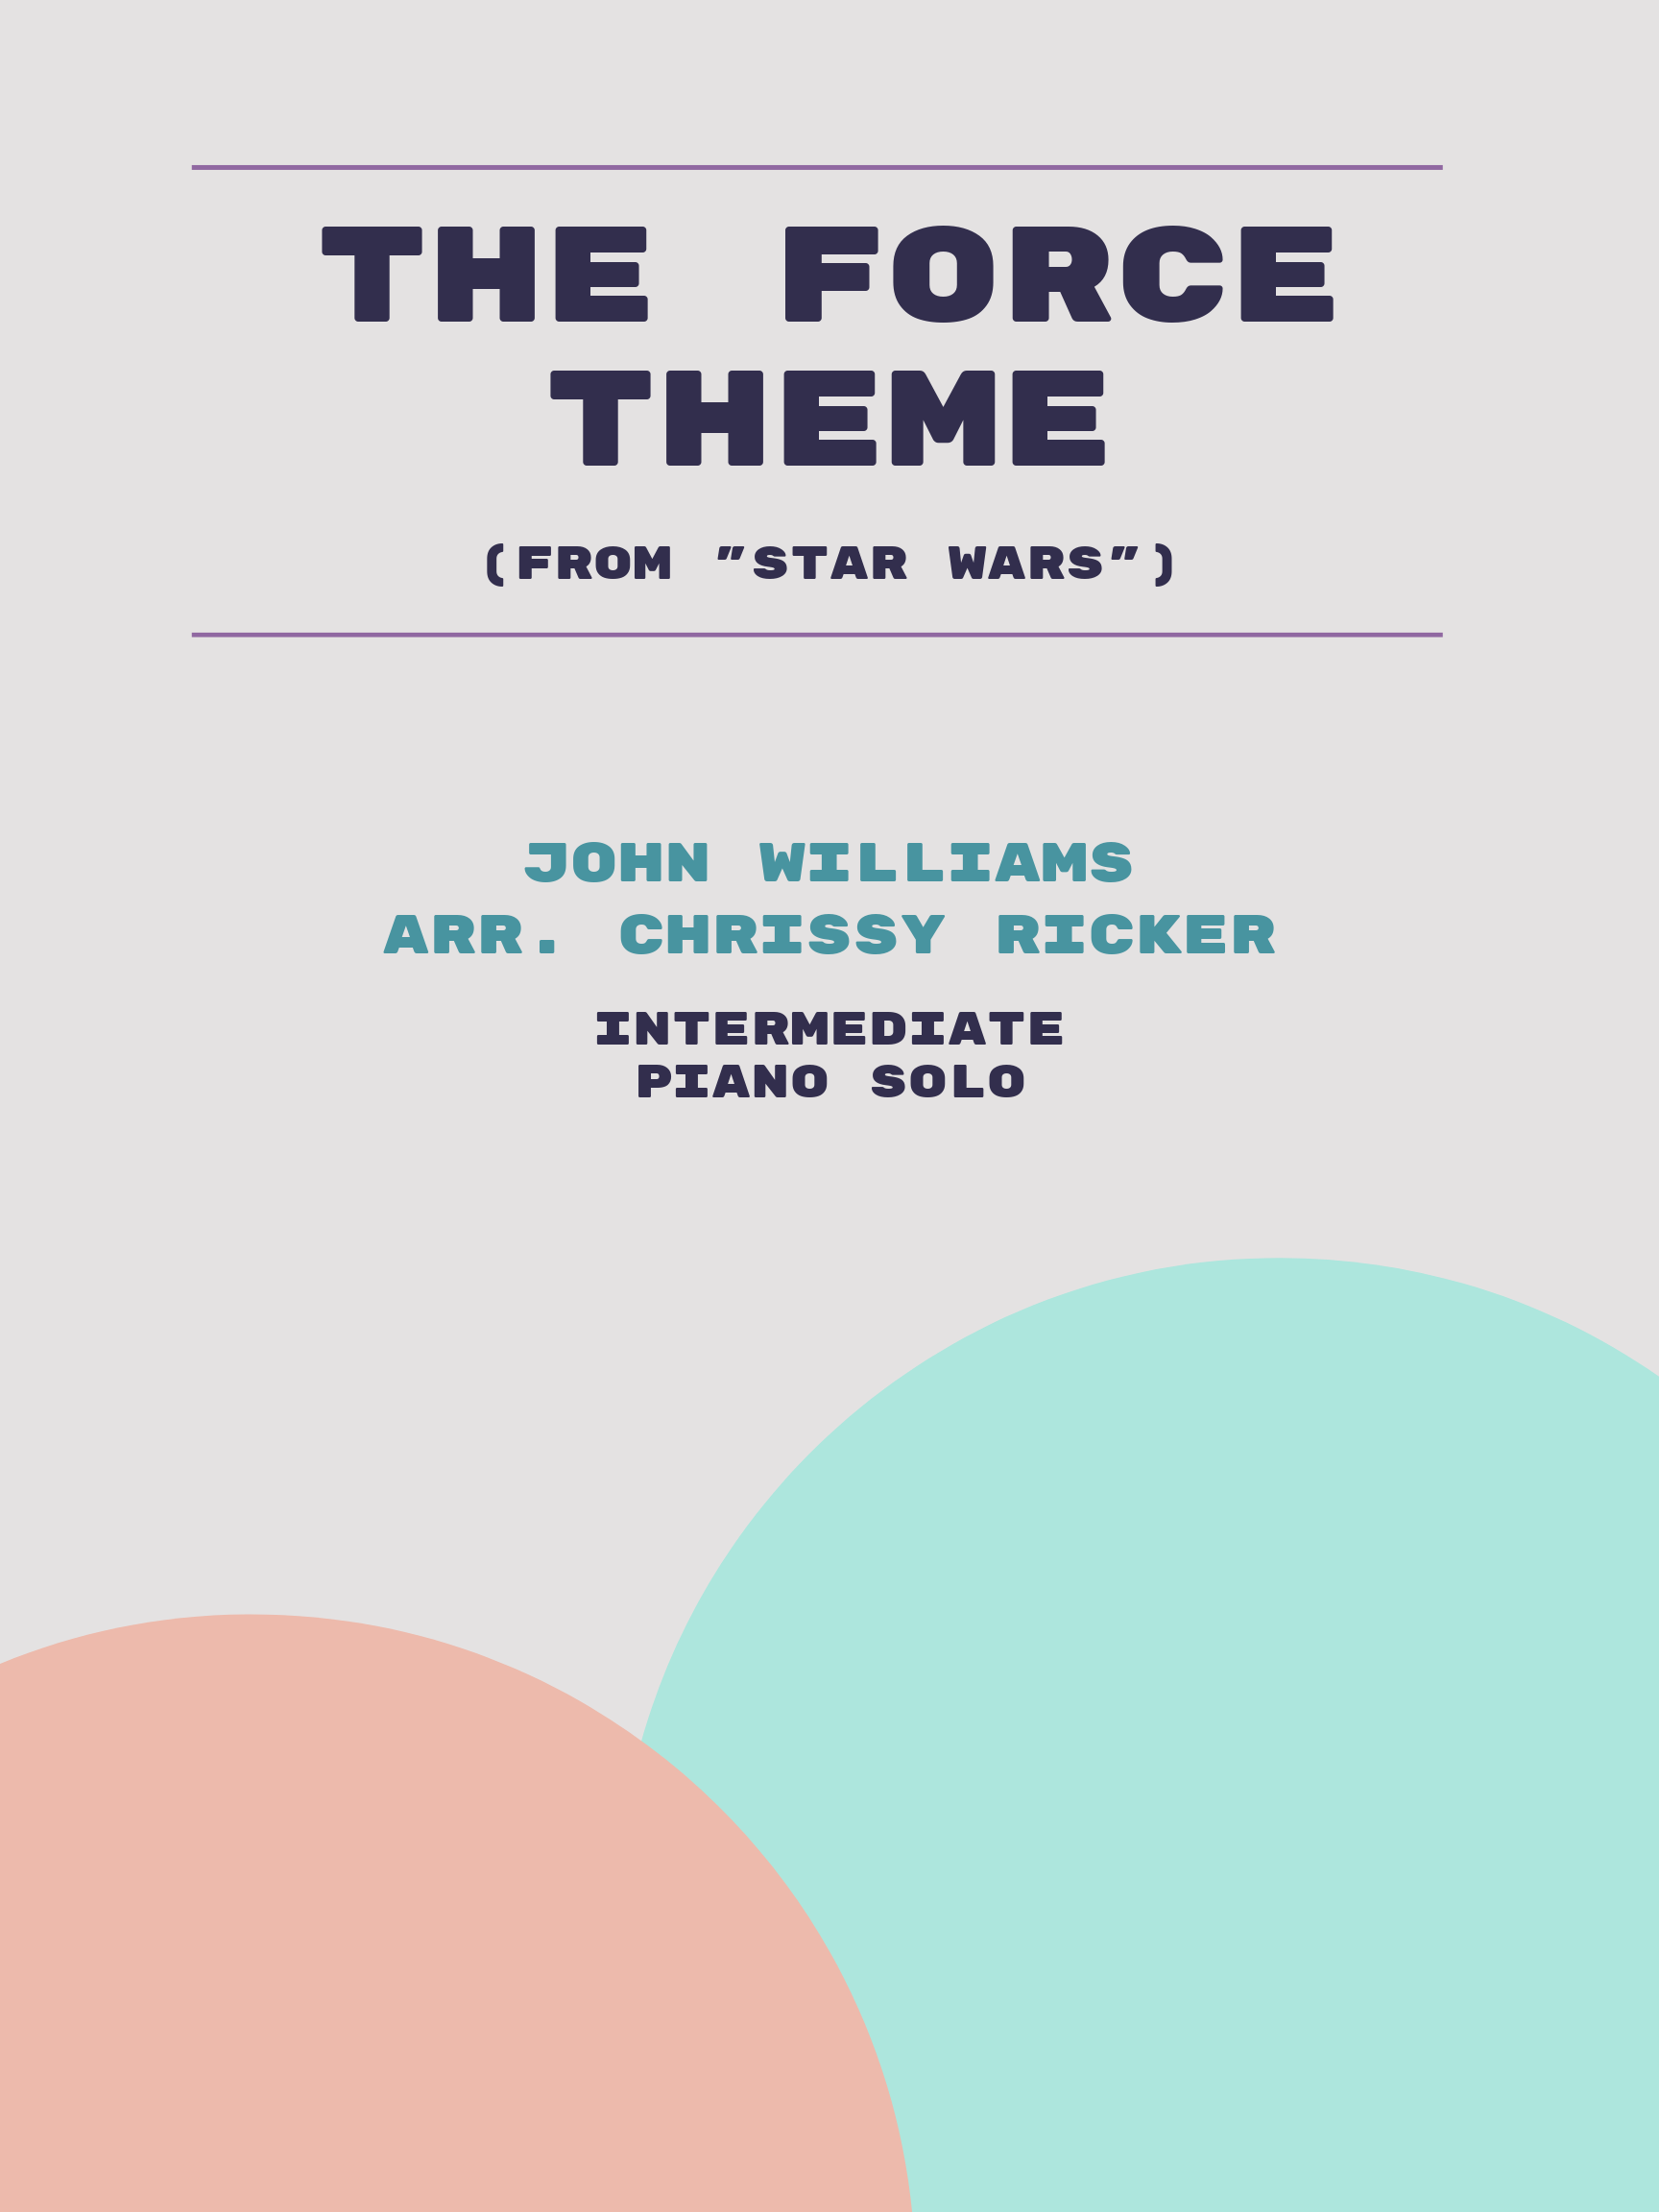 The Force Theme by John Williams